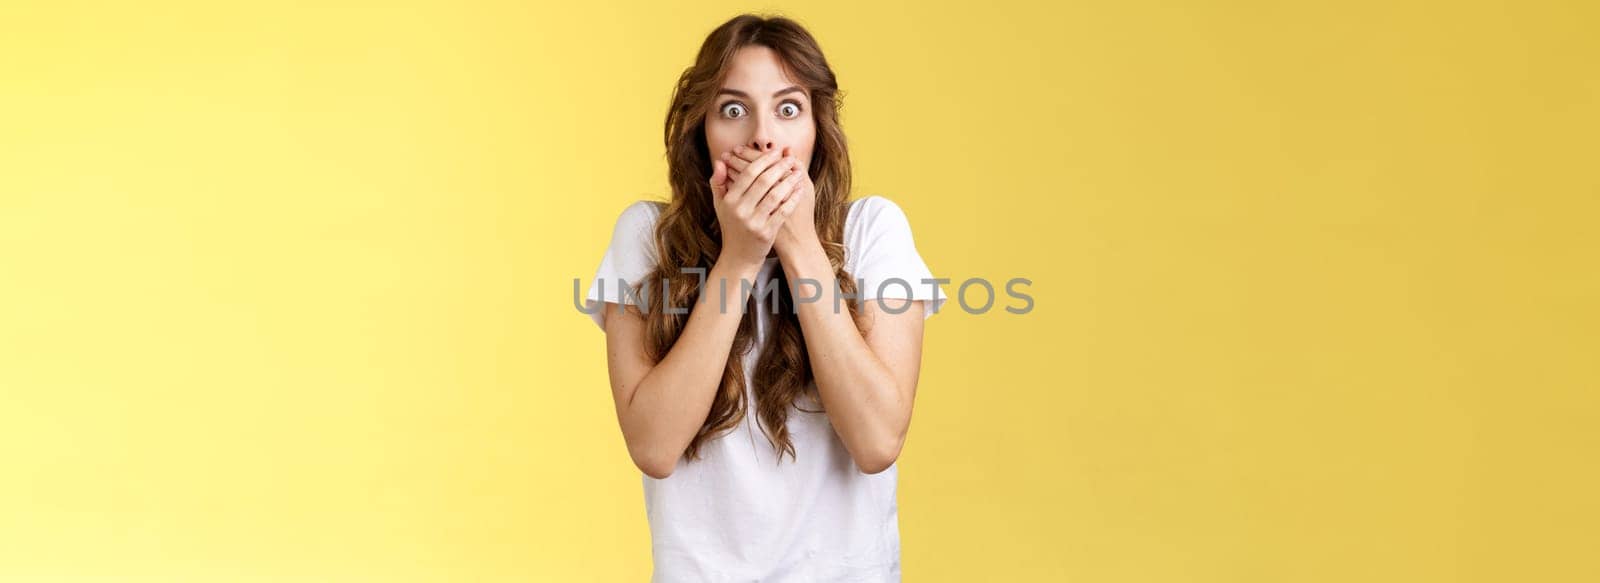 Shocked ambushed speechless cute girl hear impressive rumor shut mouth hold hands lips stare camera astonished eavesdrop juicy stunning conversation stand yellow background. Copy space